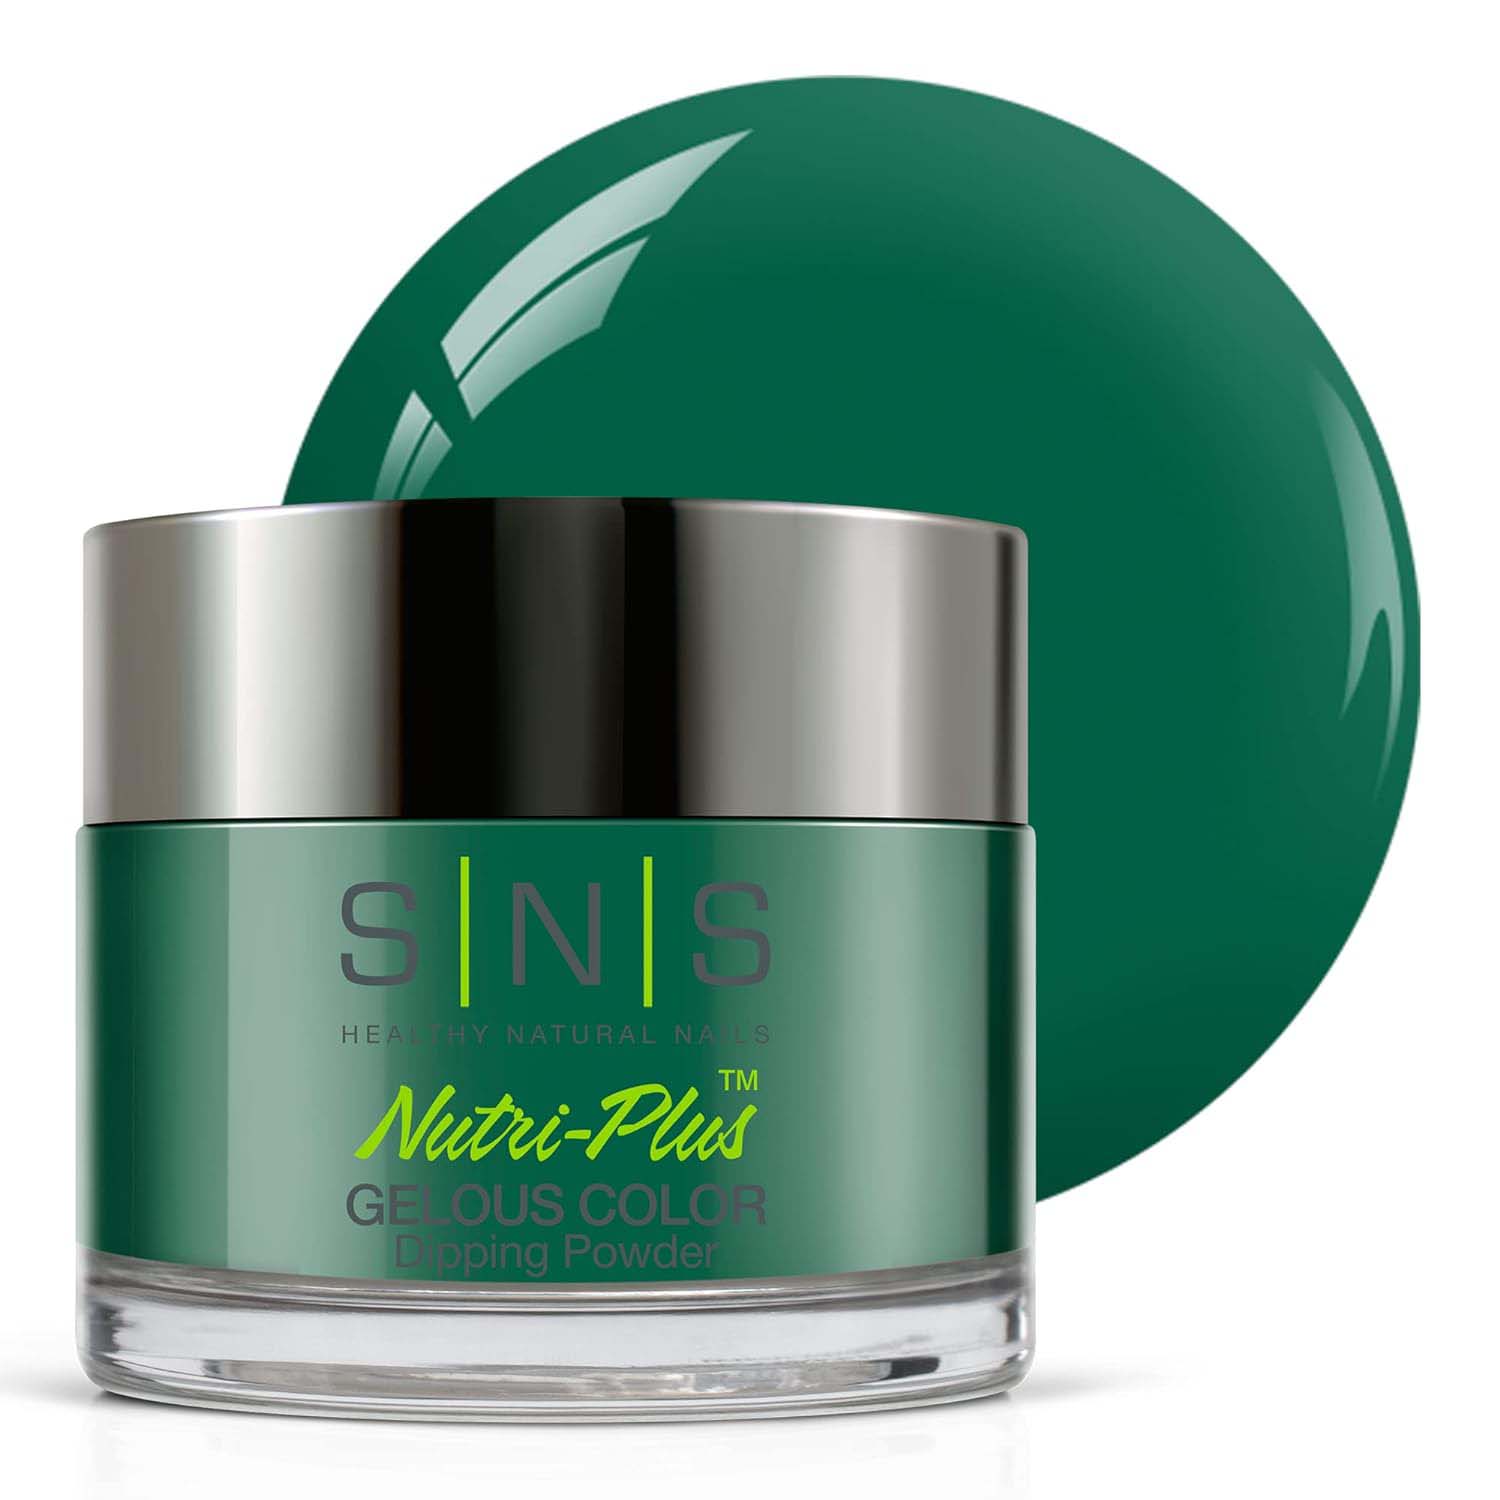 SNS Nails Dipping Powder Gelous Color in deep green